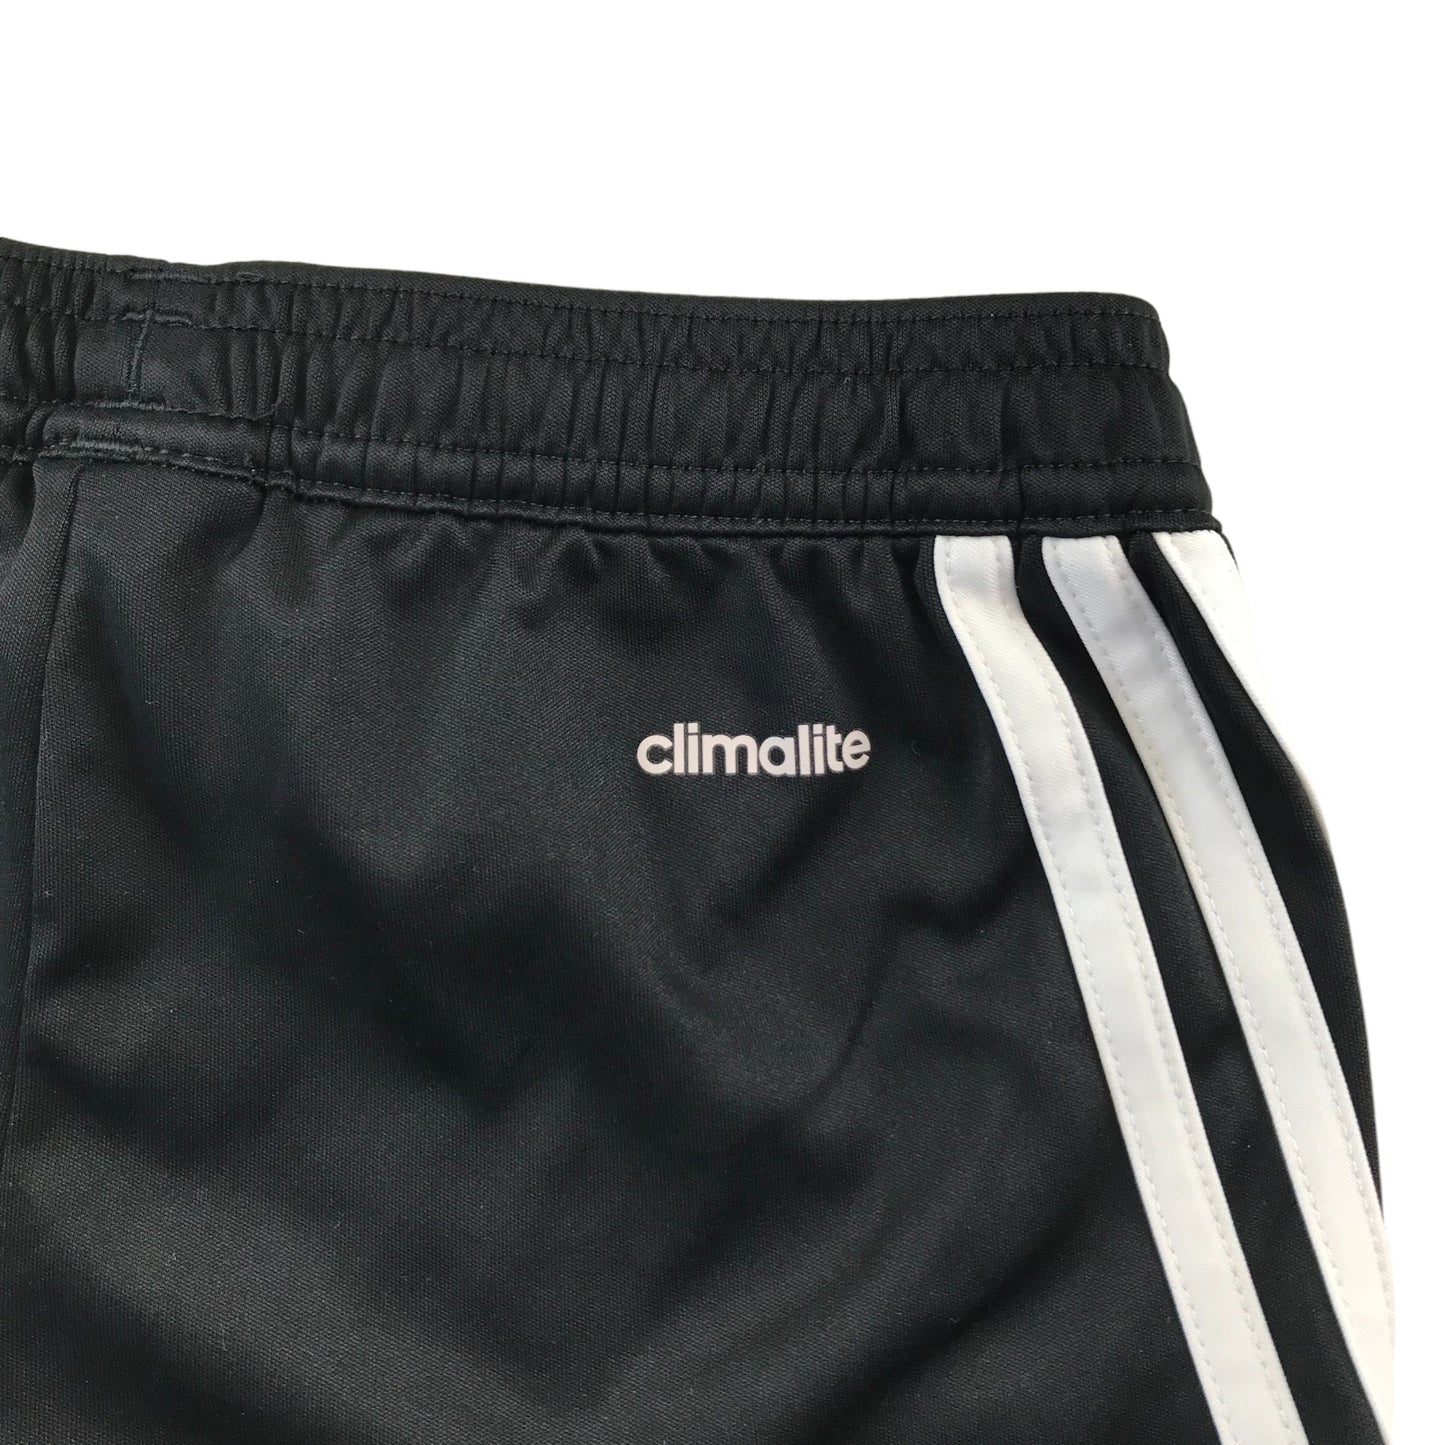 Adidas Sport Shorts Age 7-8 Black and white Football Style